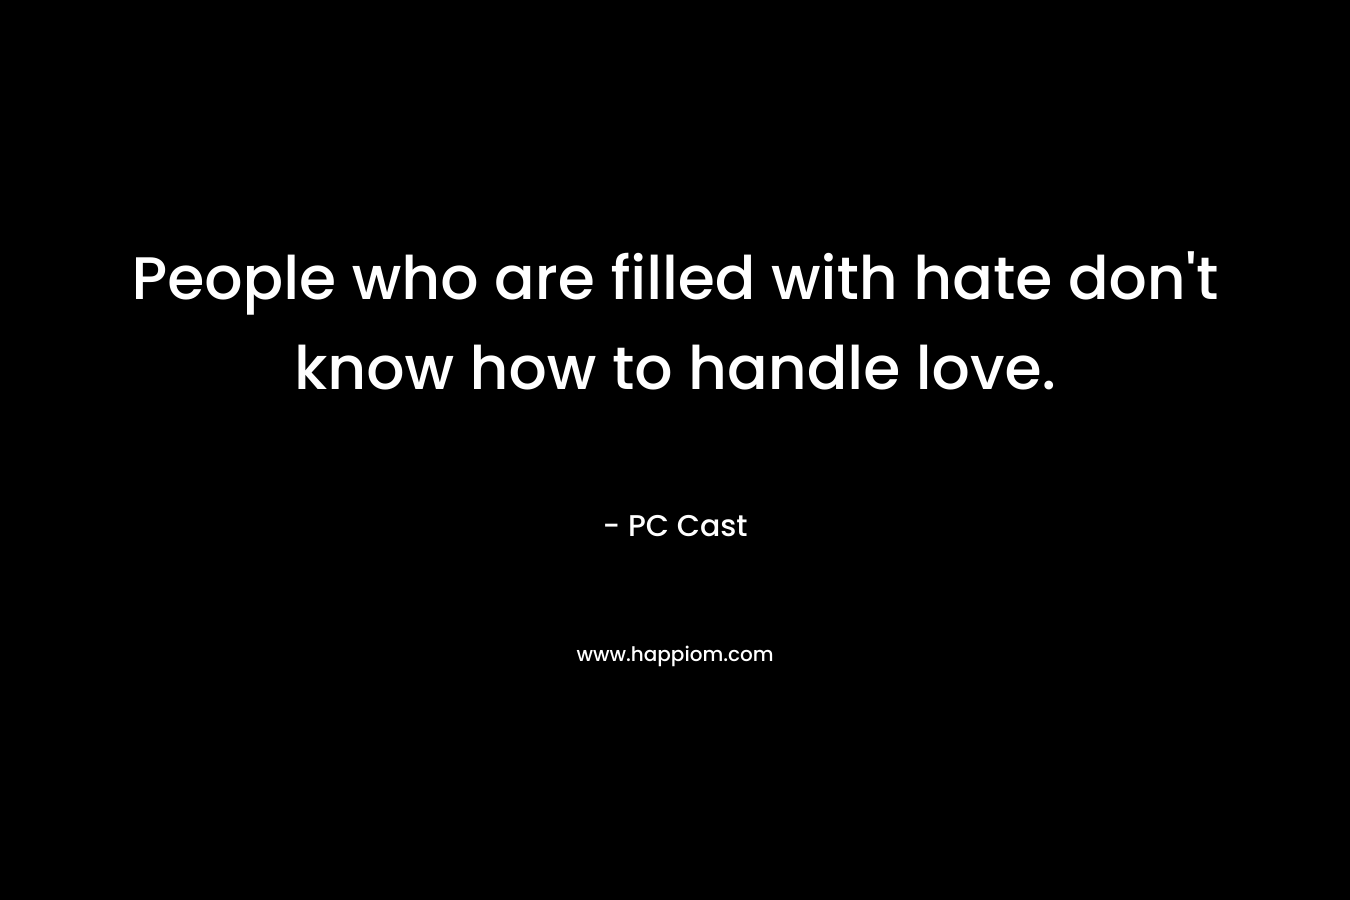 People who are filled with hate don’t know how to handle love. – PC Cast